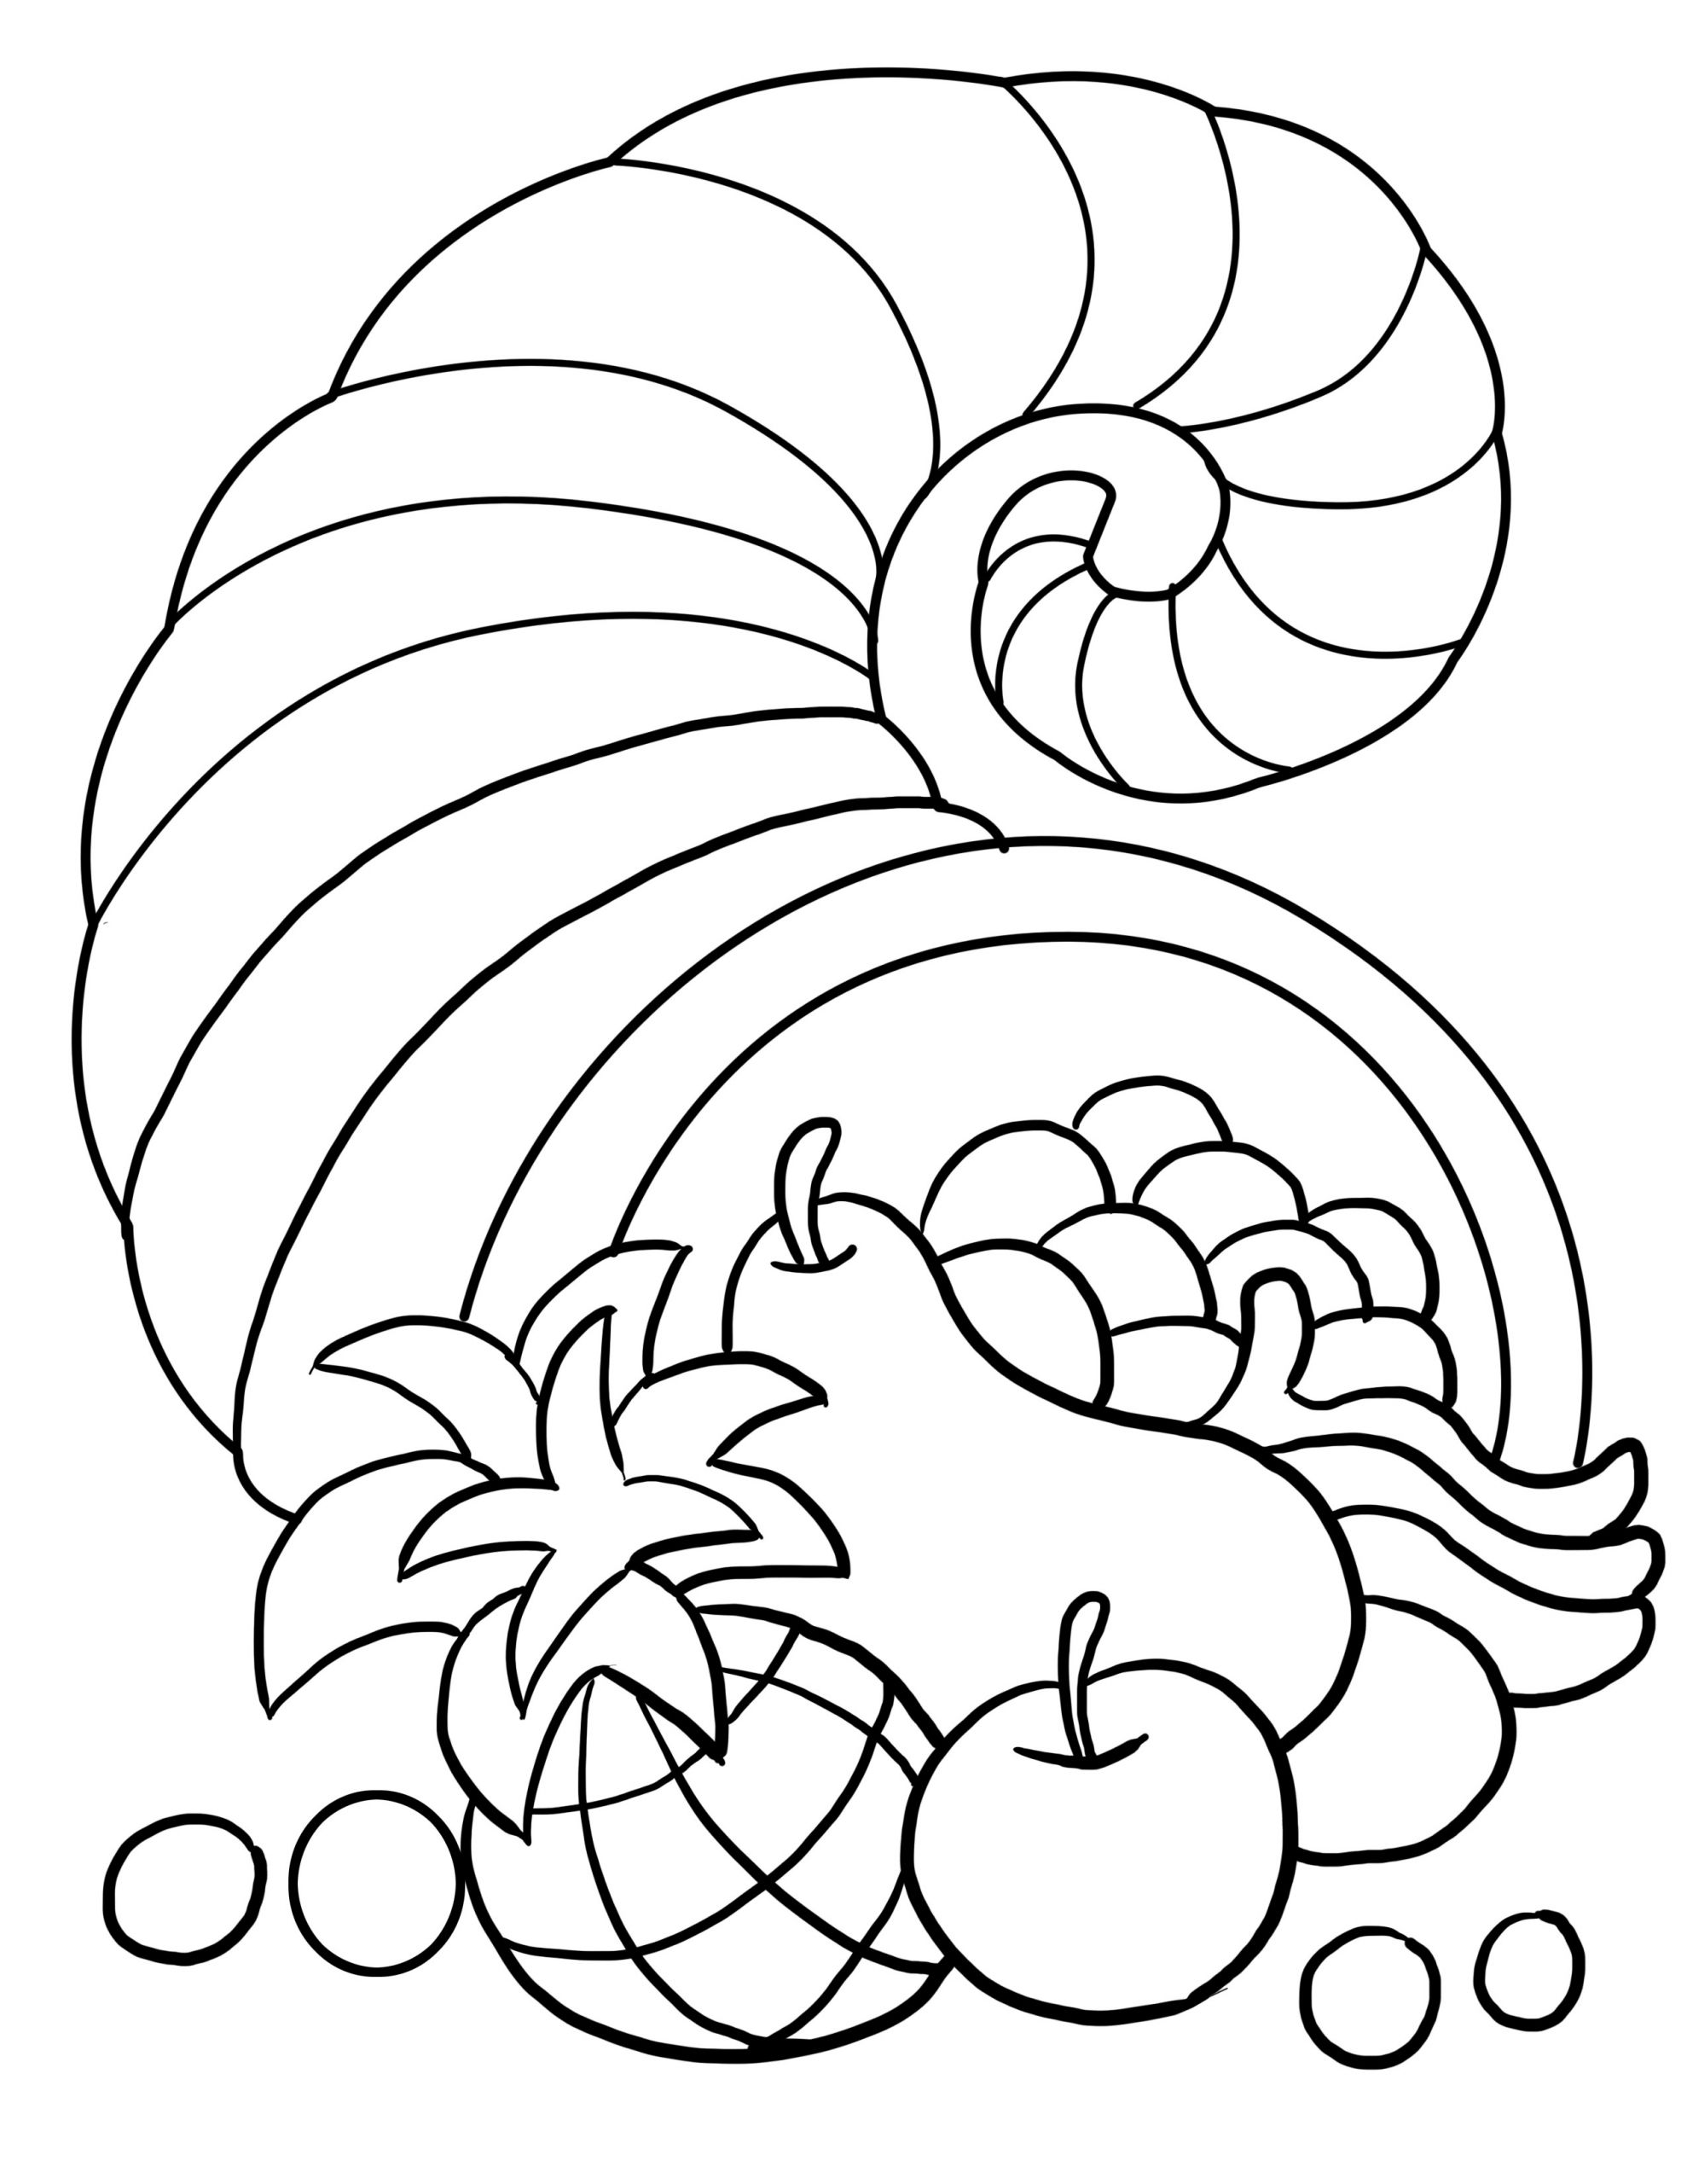 Thanksgiving Coloring Pages For Toddlers
 Thanksgiving Coloring Pages